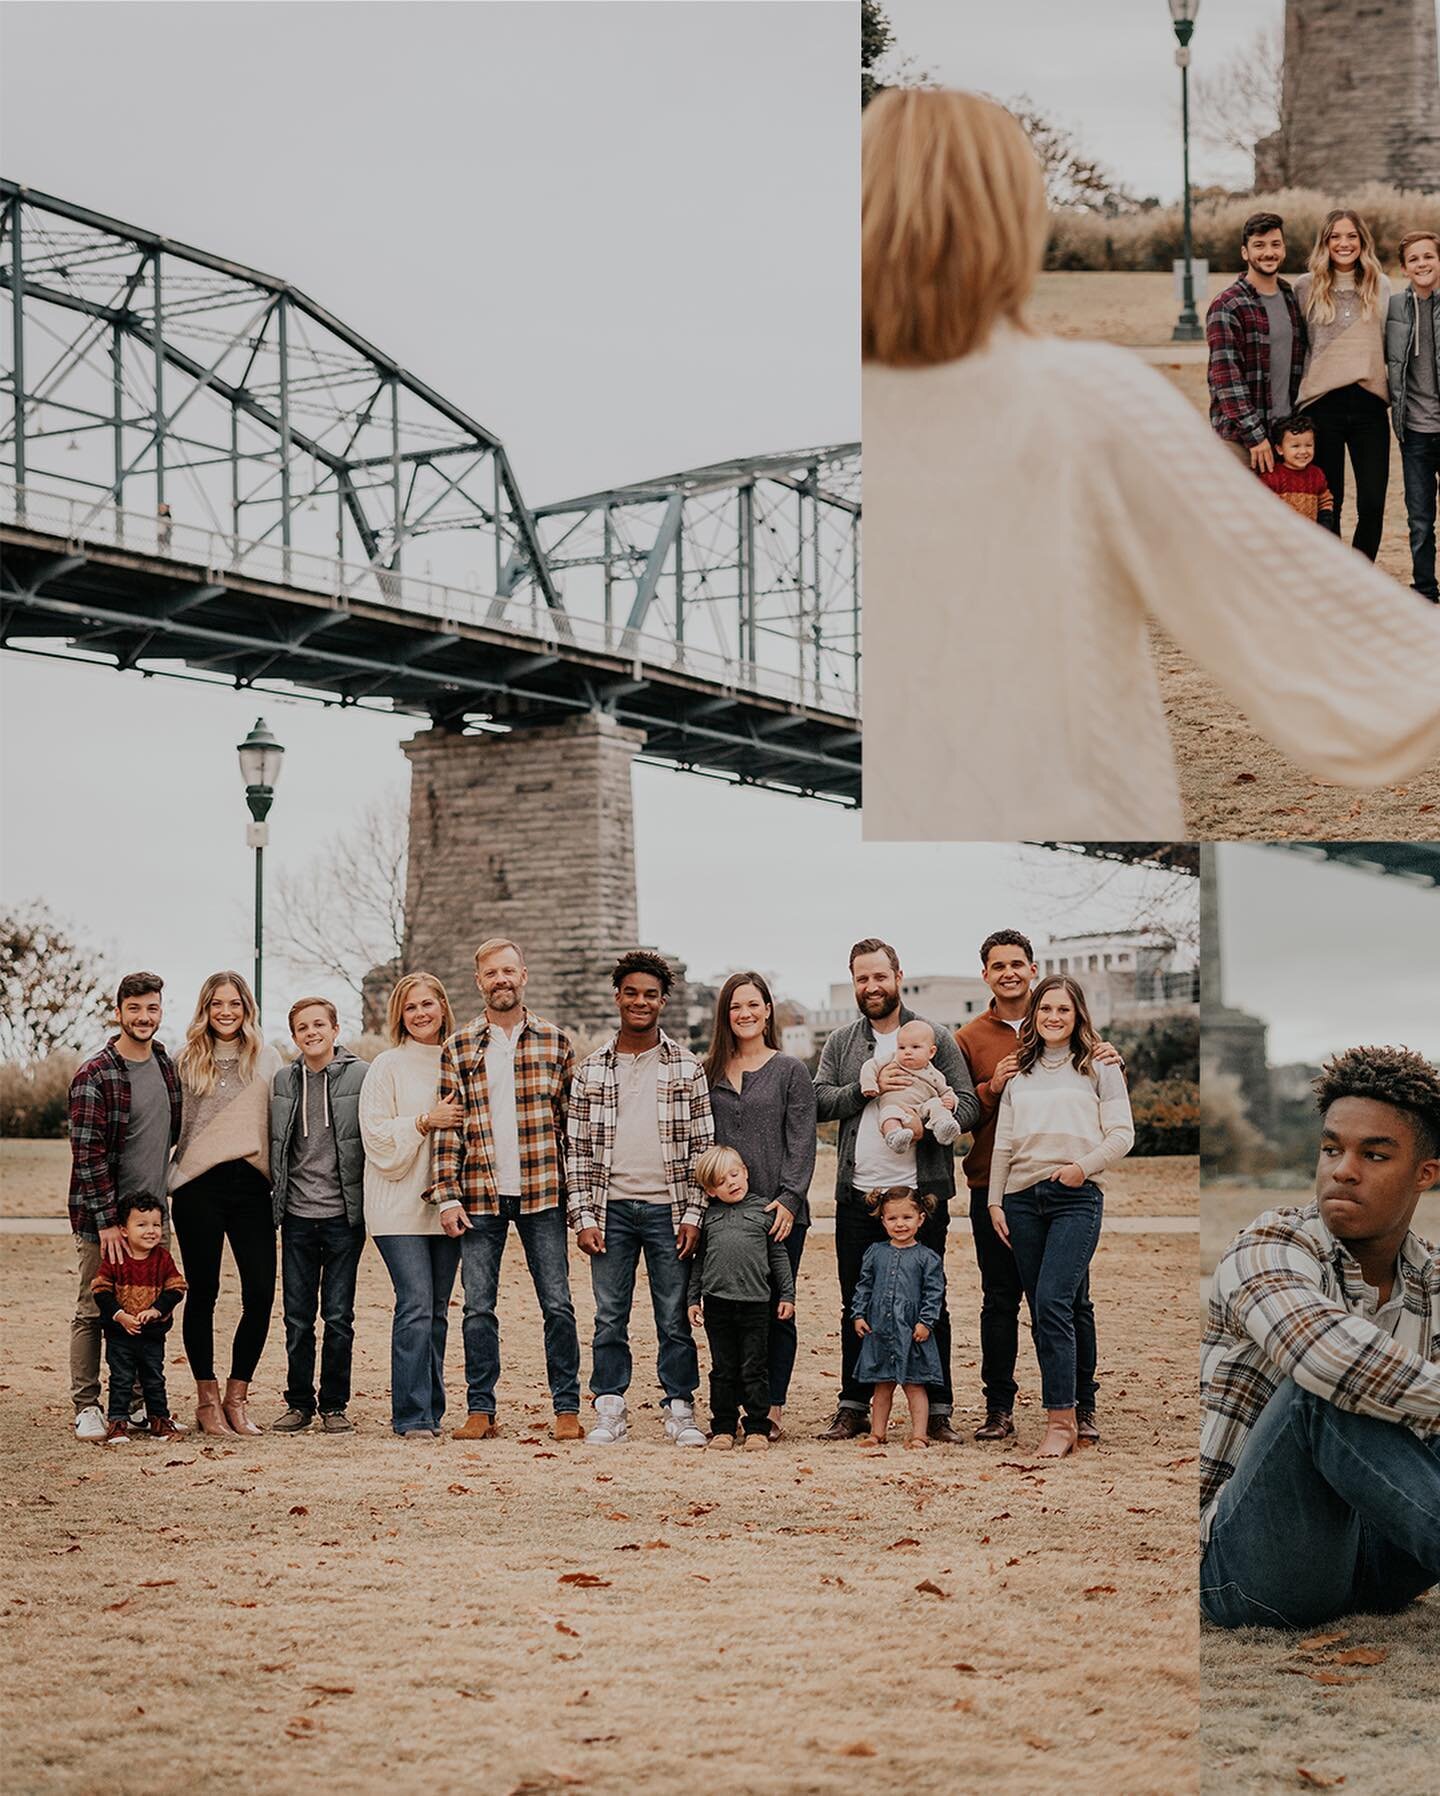 What an awesome family! Thank you for the fun Thanksgiving Day shoot!